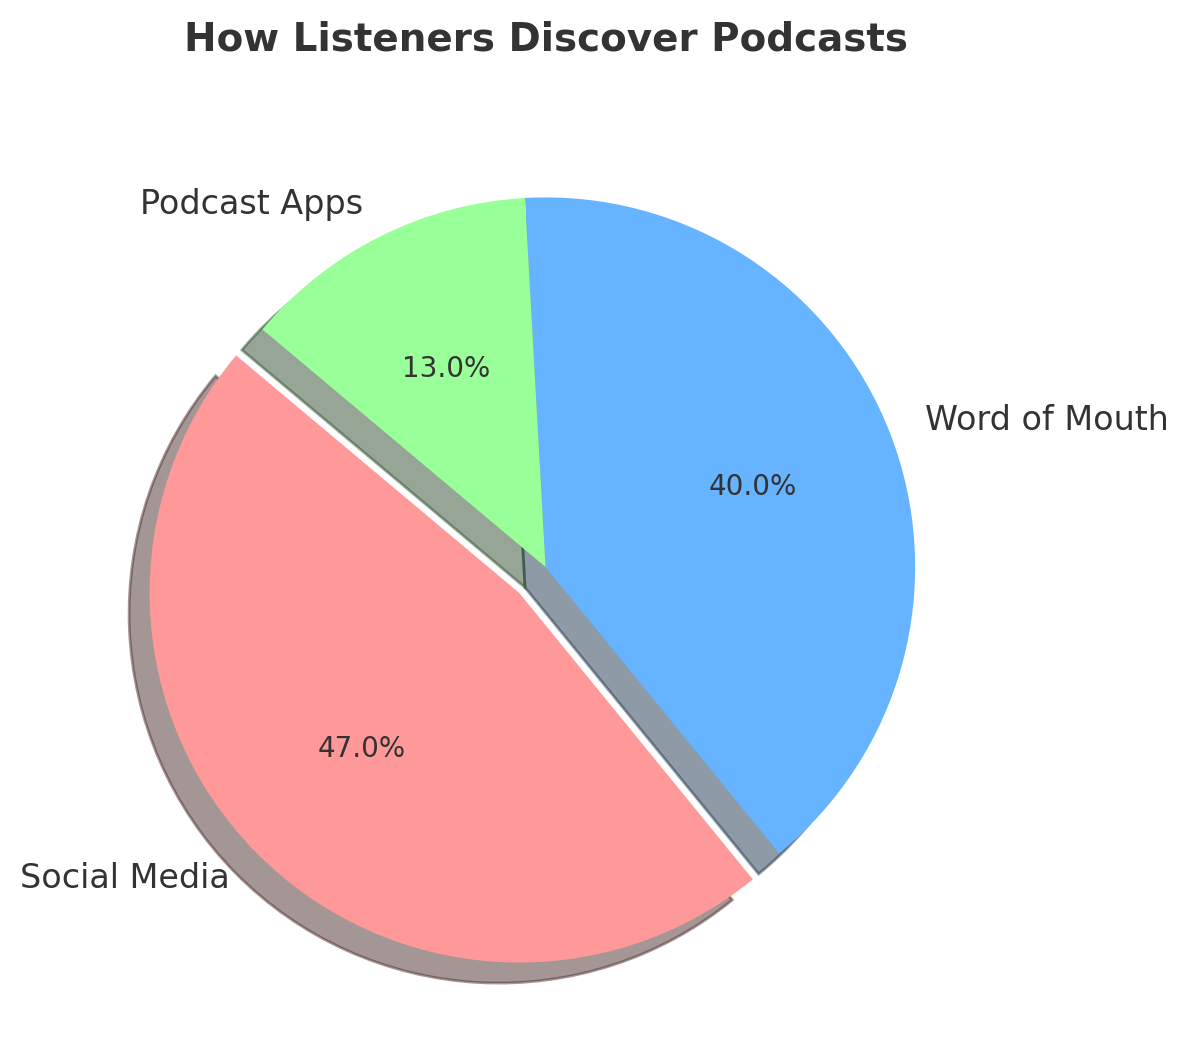 How Listeners discover podcasts